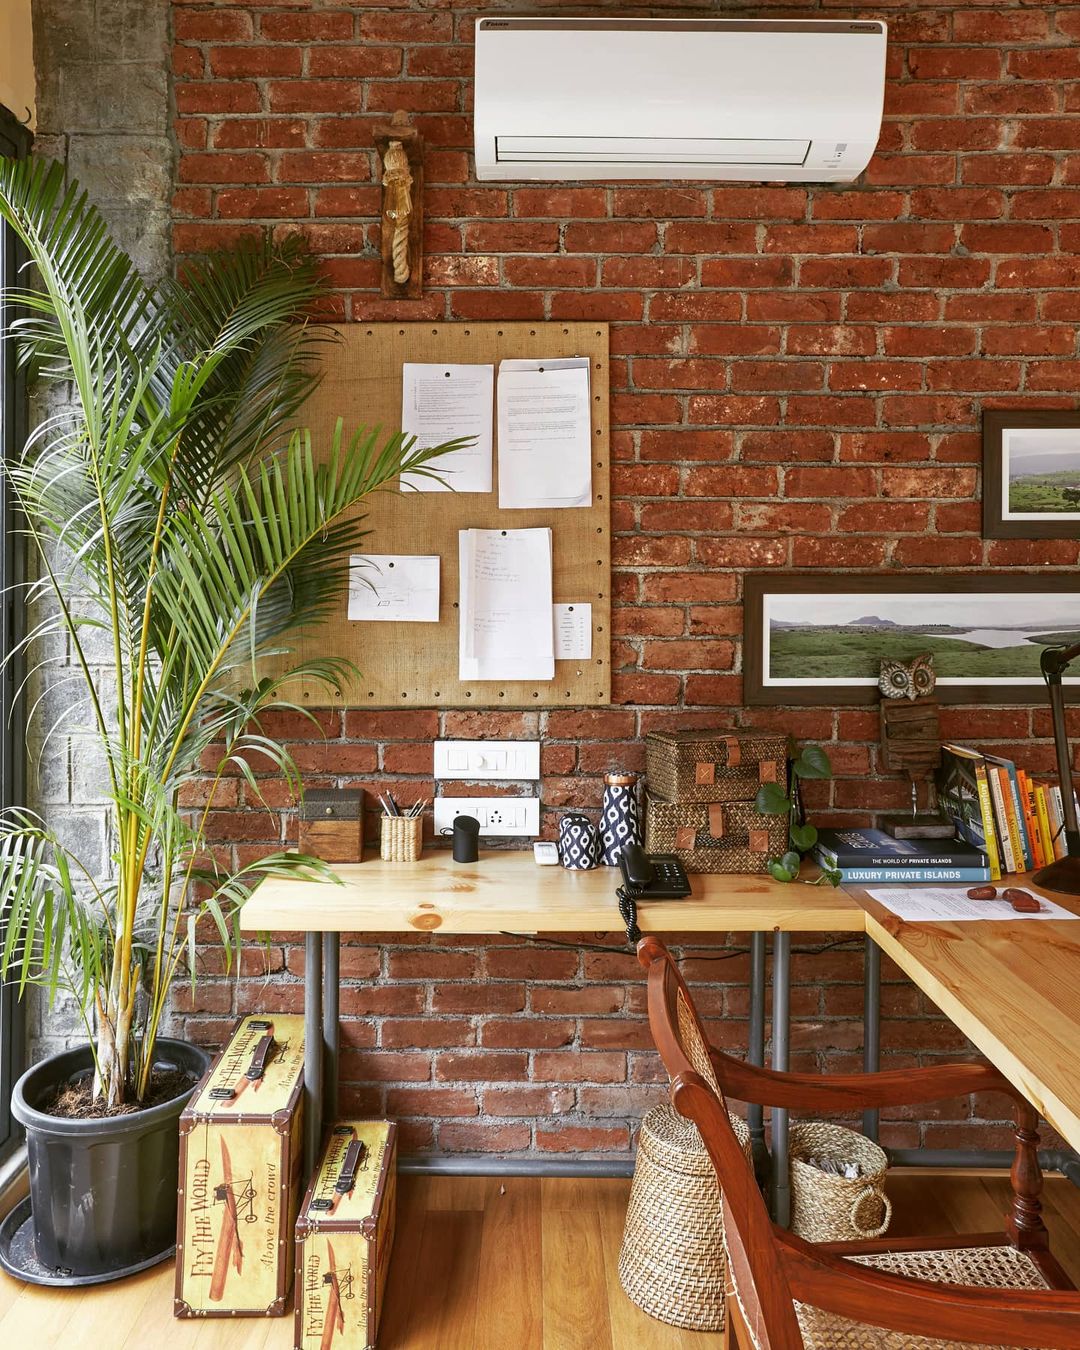  Incorporate Exposed Brick and Natural Materials for a Rustic Office